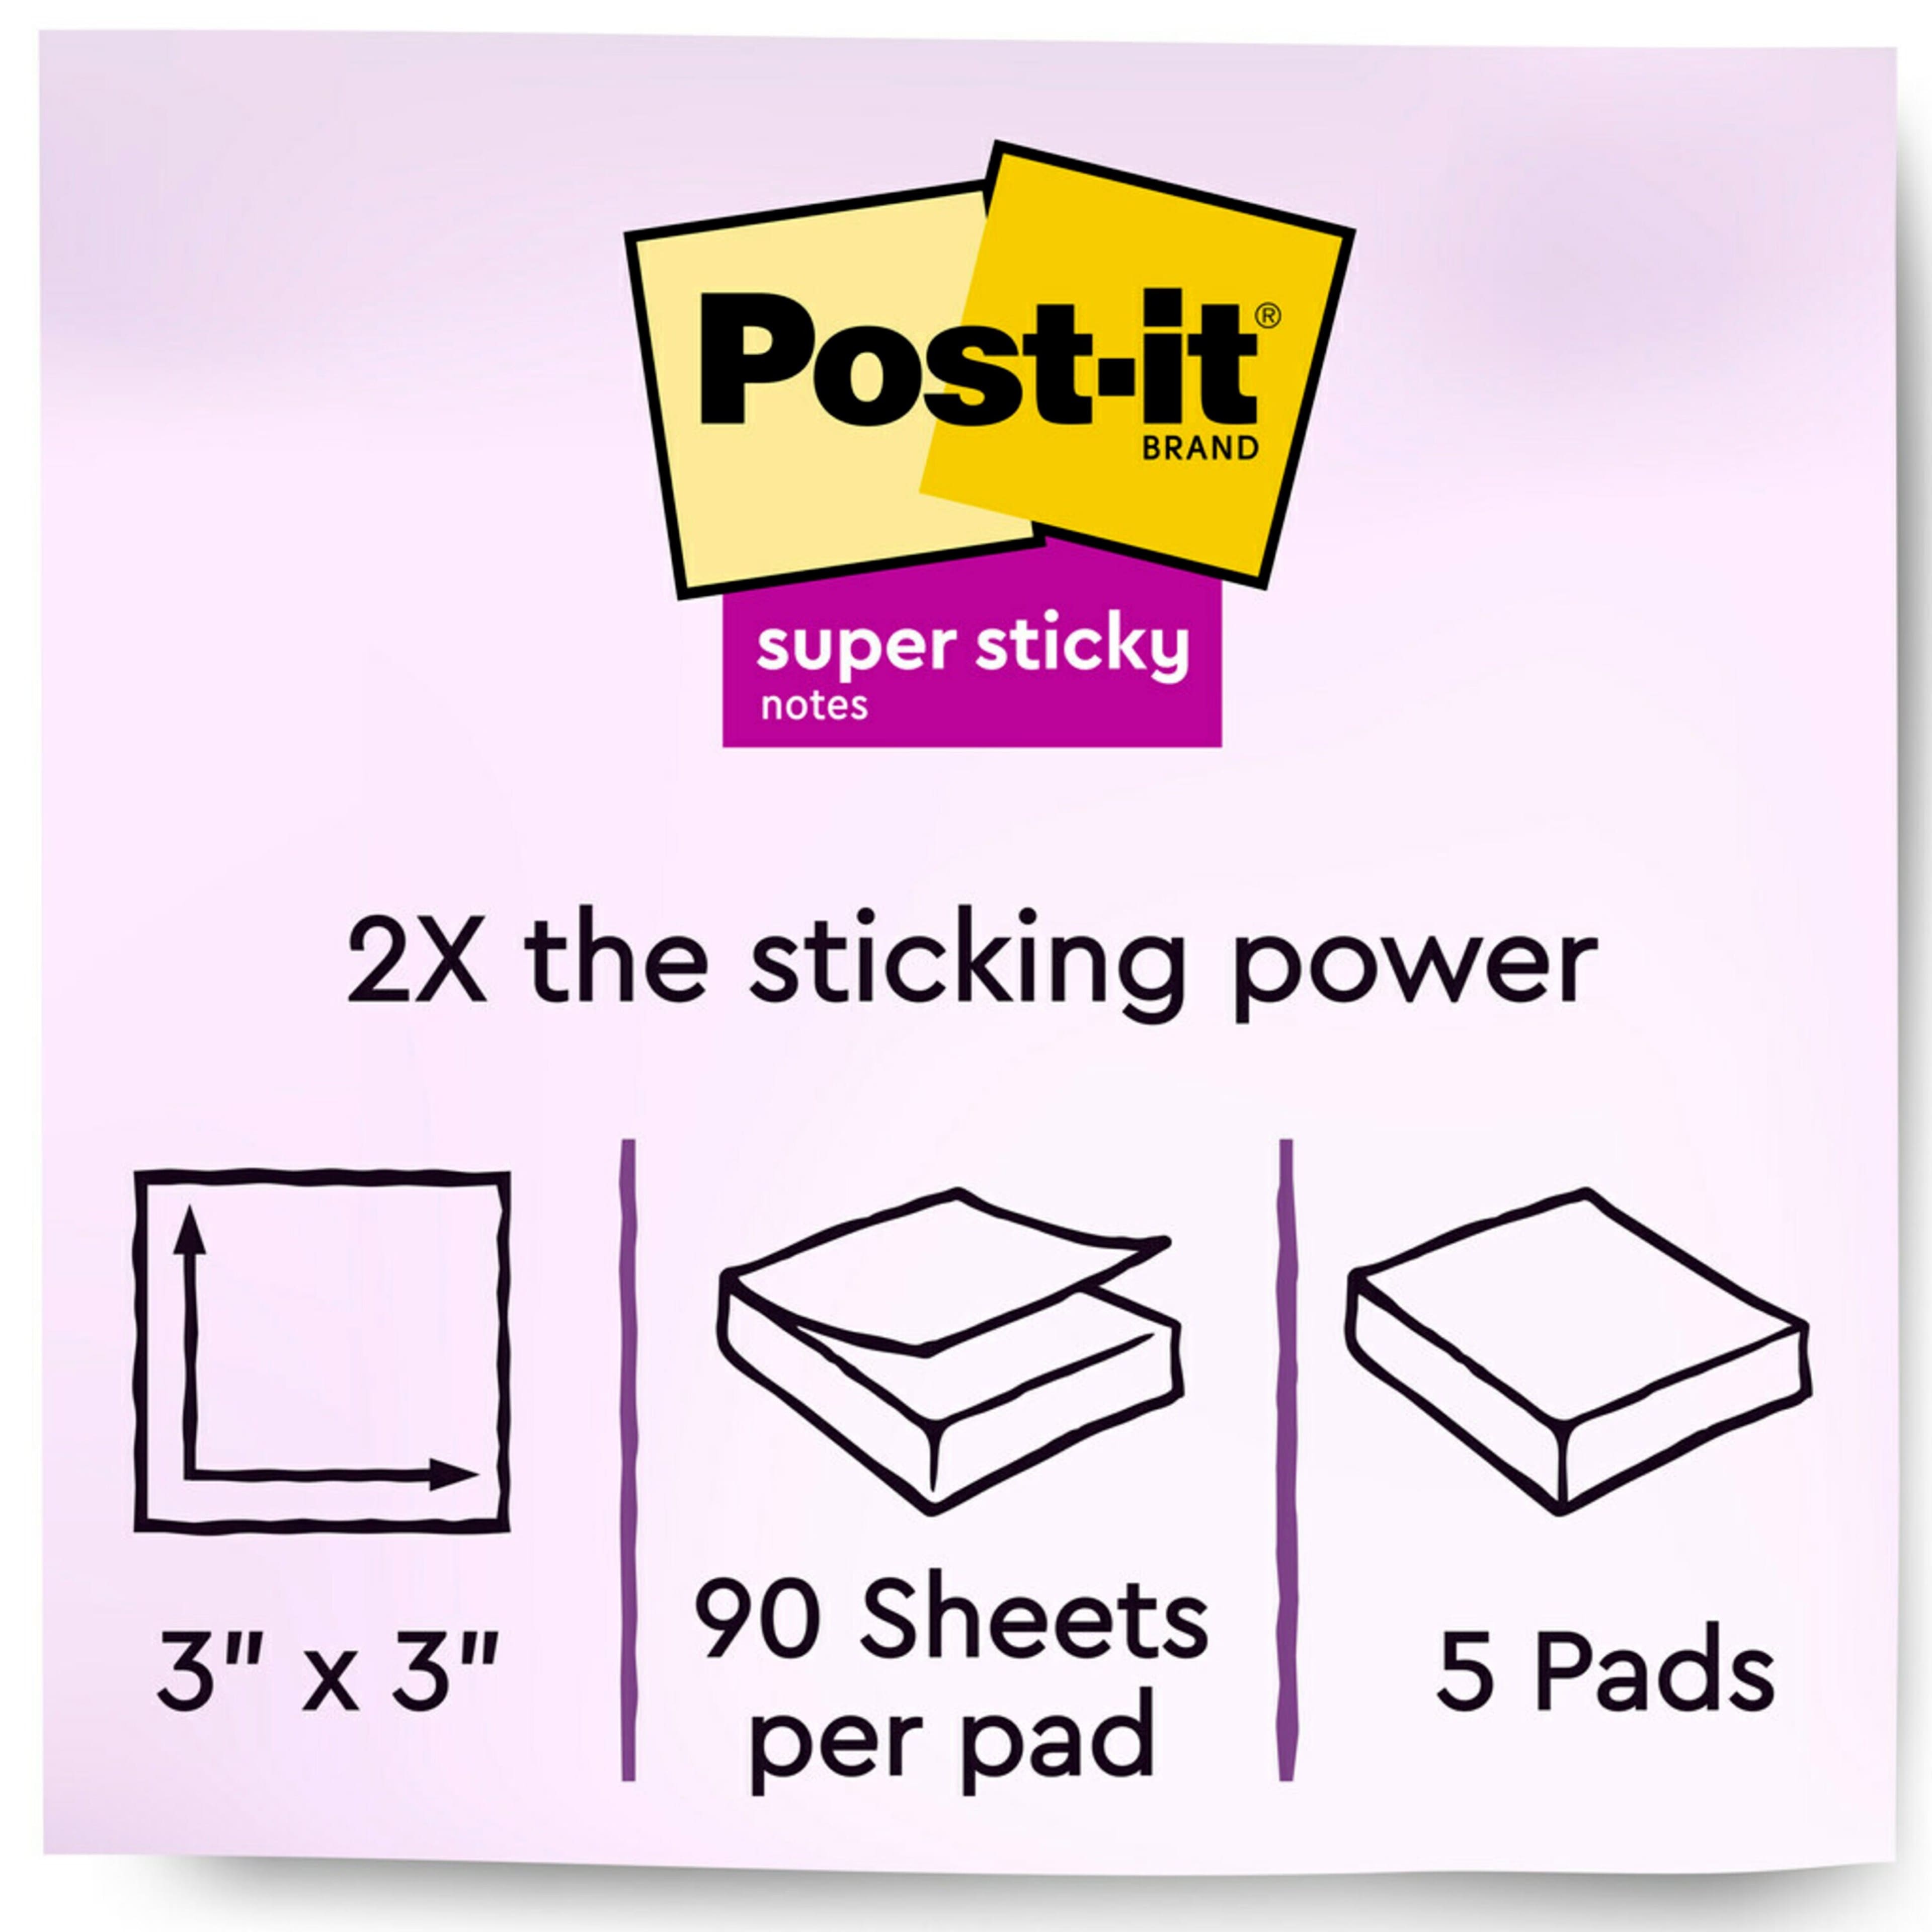 Post-it Super Sticky Notes, 3 in x 3 in, 5 Pads, 2x the Sticking